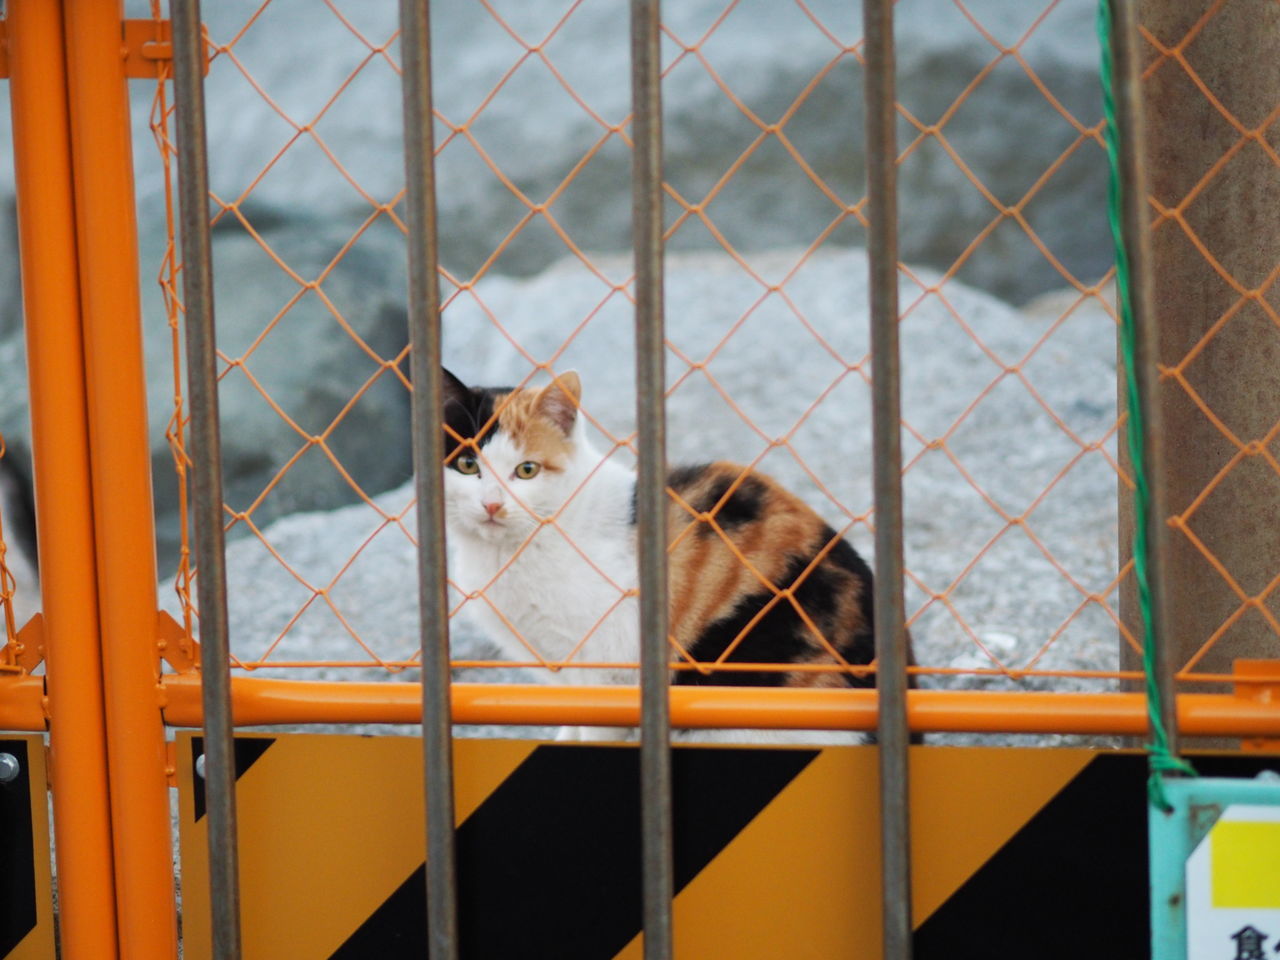 animal themes, one animal, pets, domestic animals, mammal, domestic cat, cage, indoors, cat, feline, animals in captivity, window, metal grate, glass - material, fence, relaxation, no people, zoology, two animals, chainlink fence